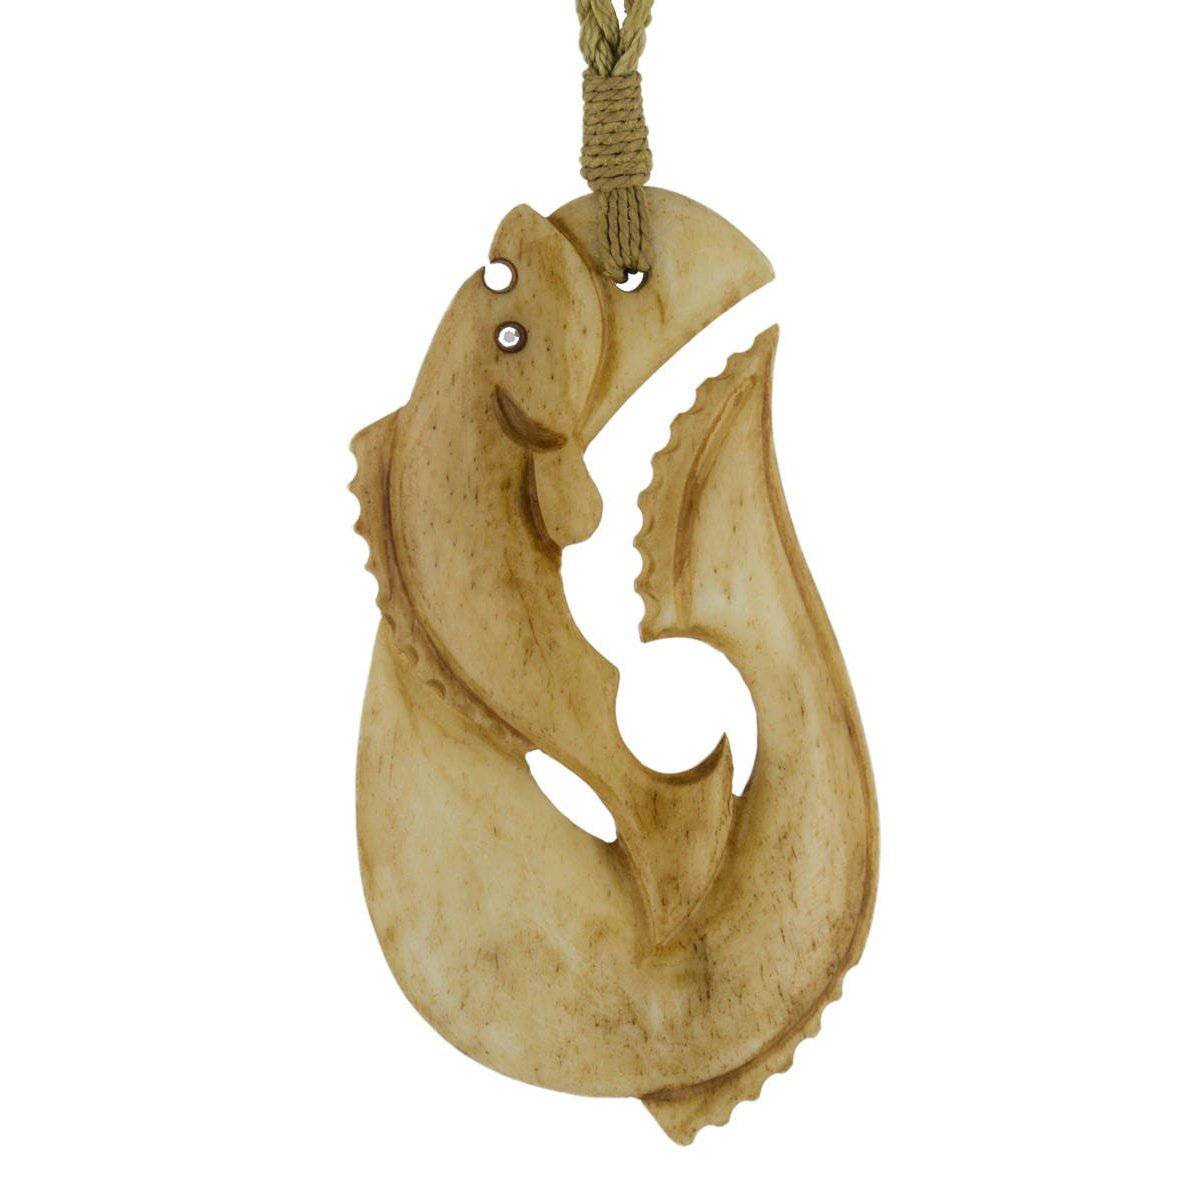 Pacific Salmon Inspired, Aged Bone Fish Hook Necklace - Earthbound Pacific